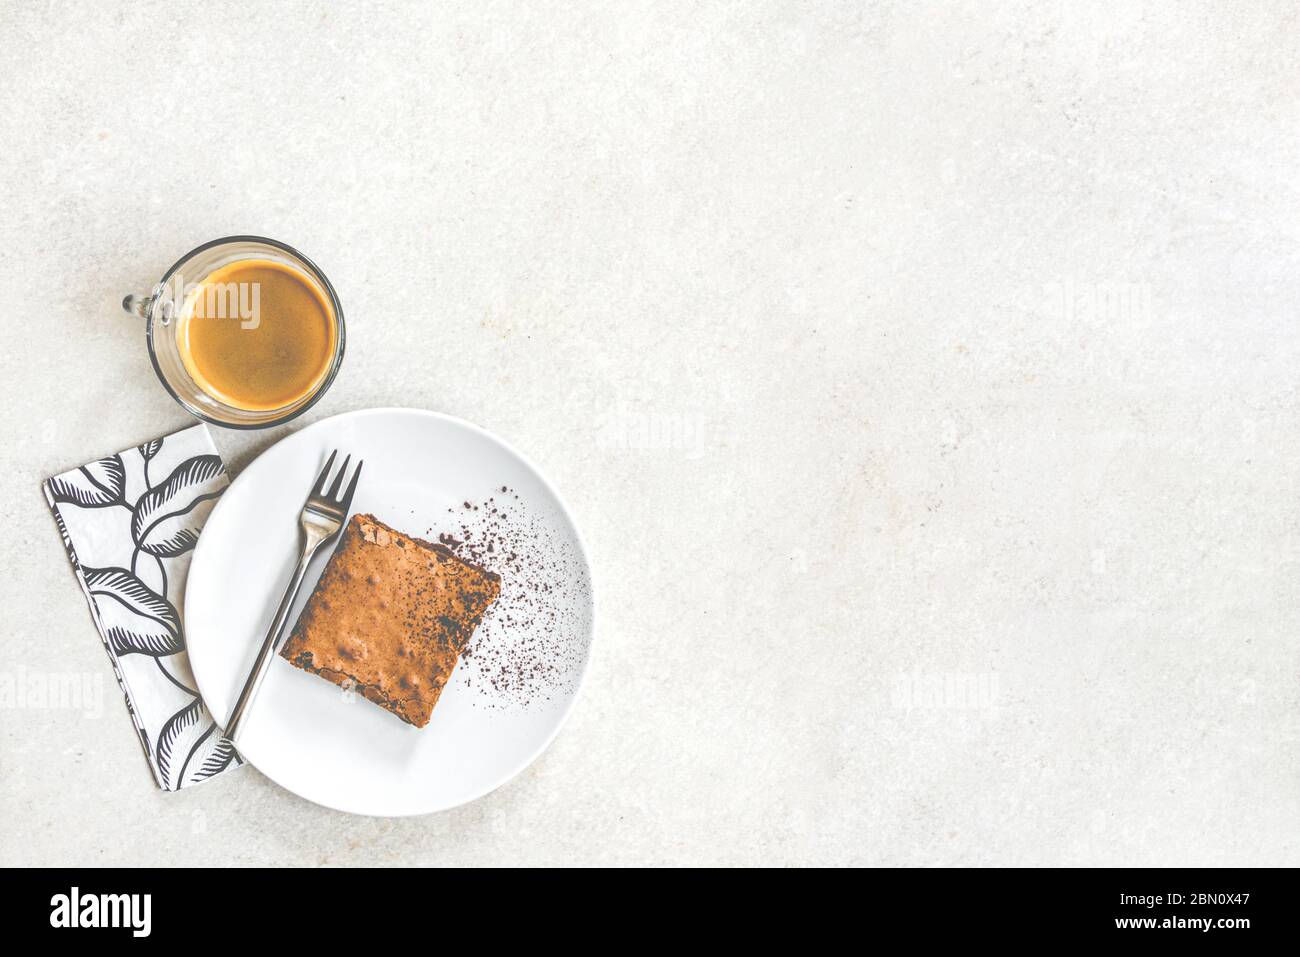 Top view of a cup of coffee and a dessert plate with brownie cake over white rustic background. Stock Photo